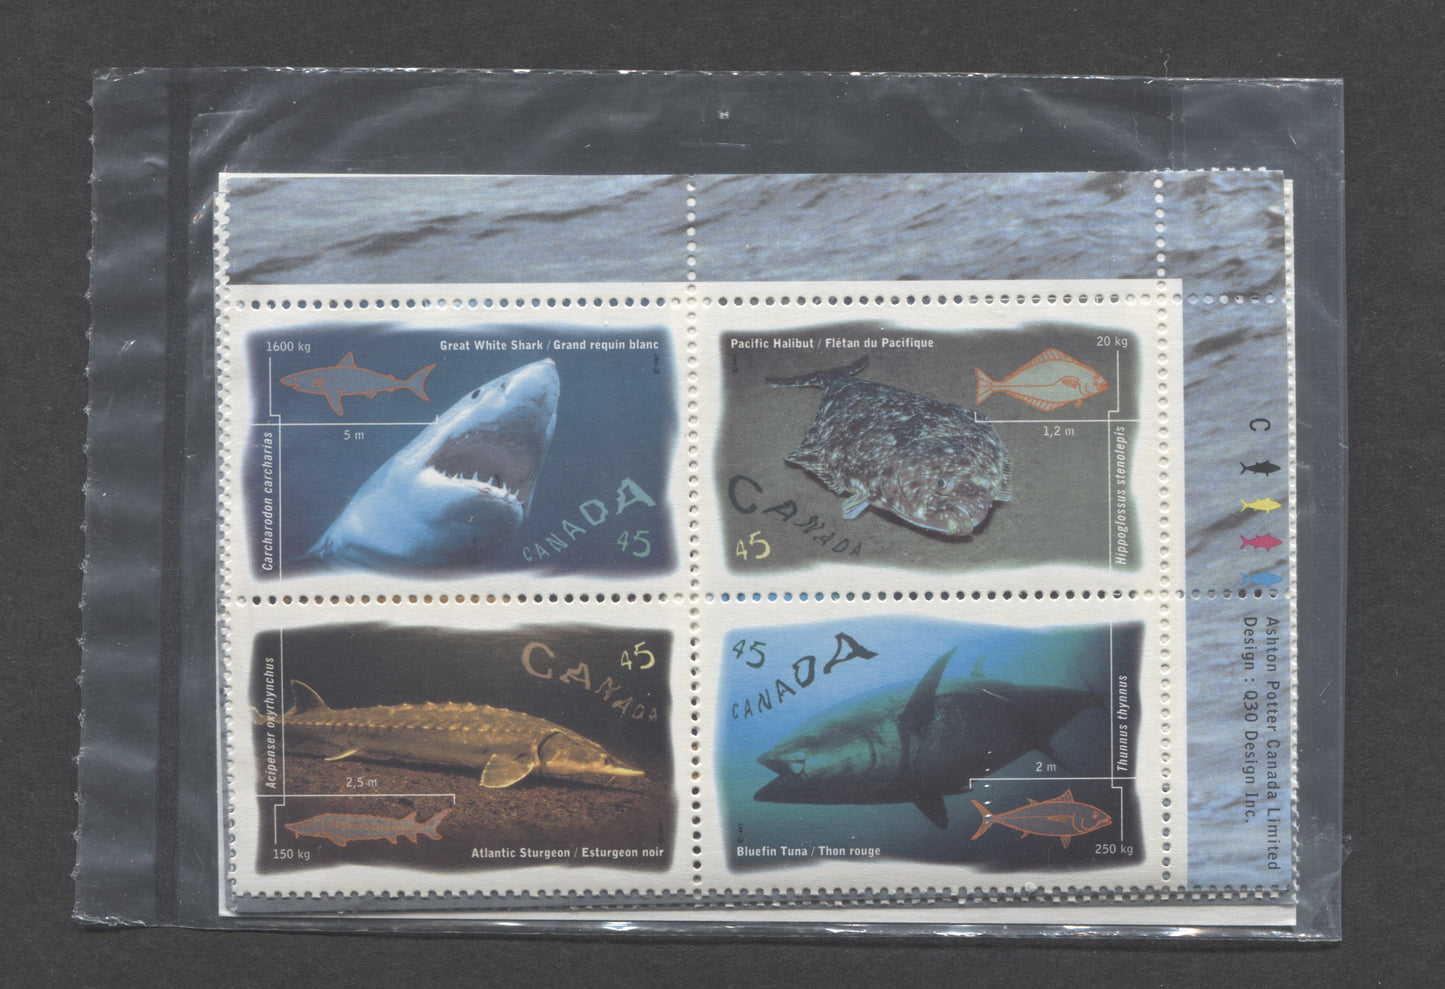 Lot 314 Canada #1644a 45c Multicolored 1997 Ocean Water Fish Issue, Sealed Pack Of Corner Inscription Blocks on FCP Coated Paper With HB Type 6A Insert Card, VFNH, Unitrade Cat. $18